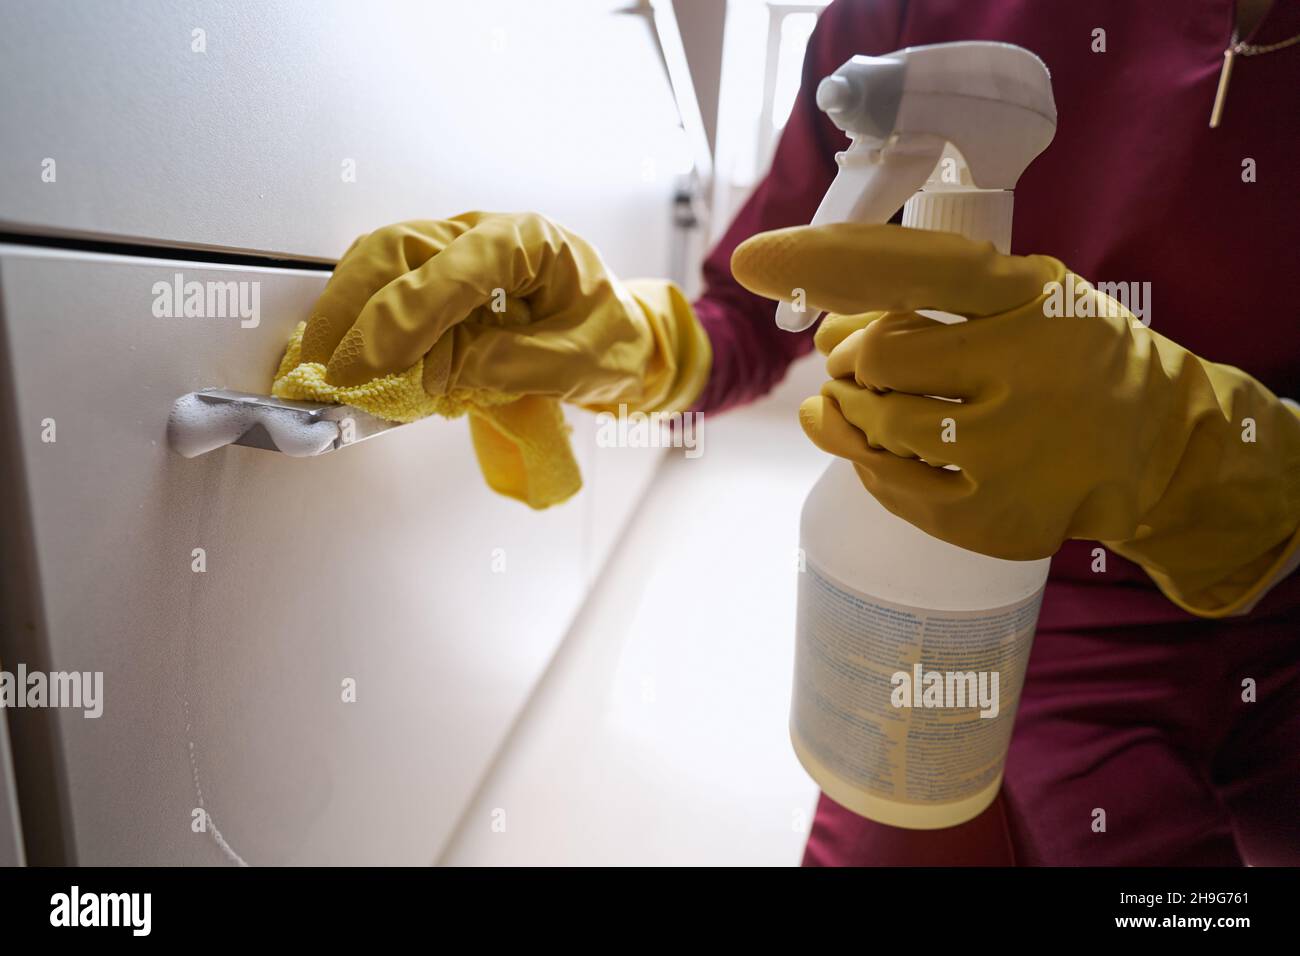 Professional Cleaner Is Cleaning Kitchen Cabinet Handle 2H9G761 